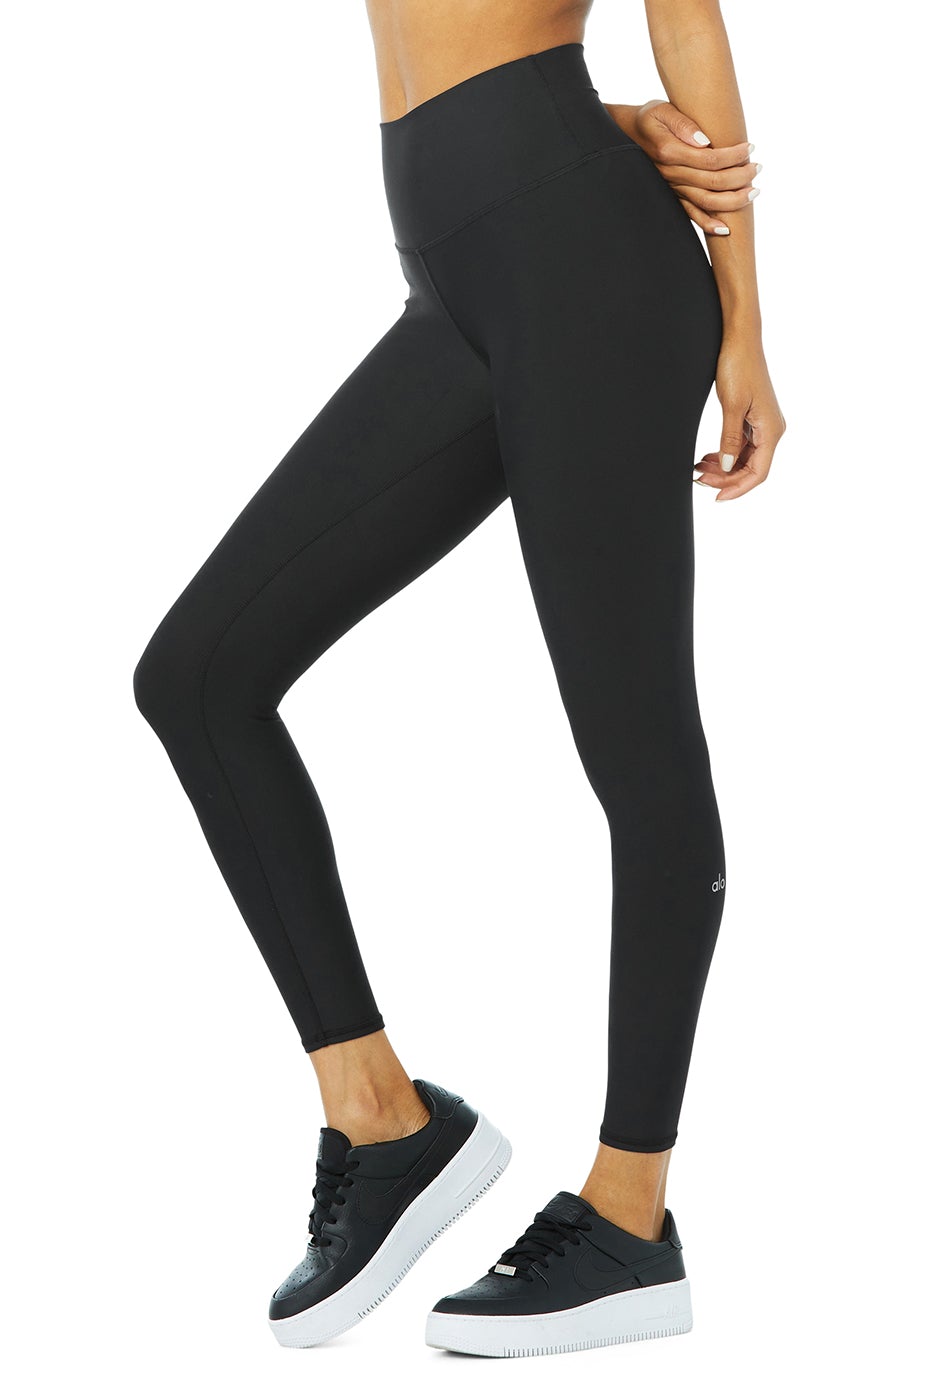 You will love these postpartum leggings, they are so comfy#fyp